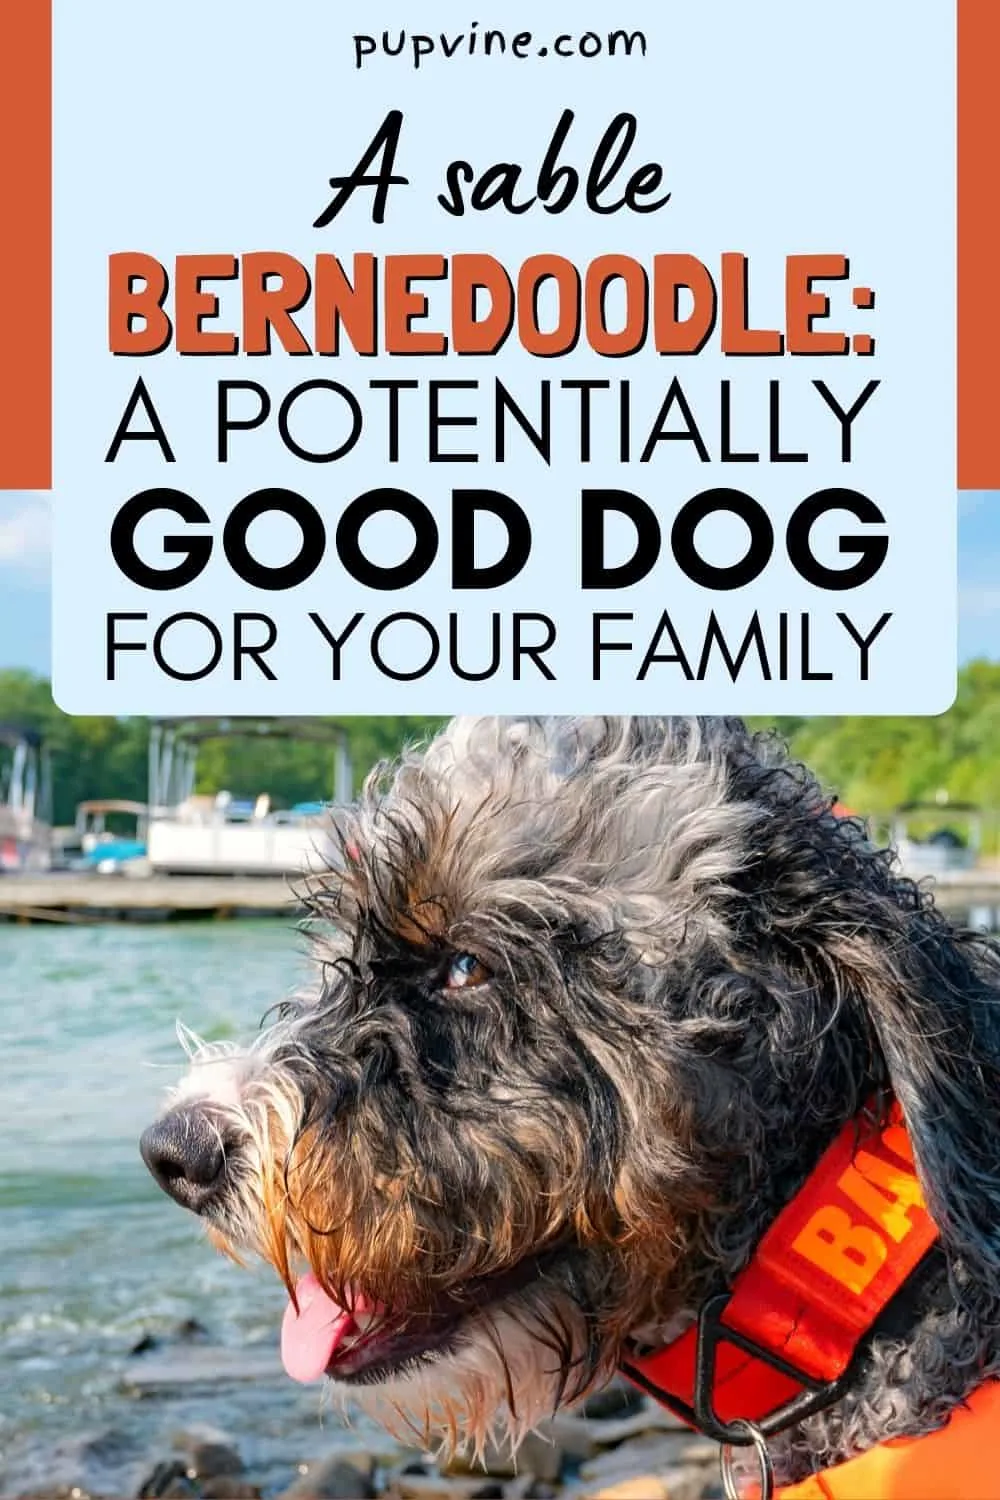 A Sable Bernedoodle: A Potentially Good Dog For Your Family